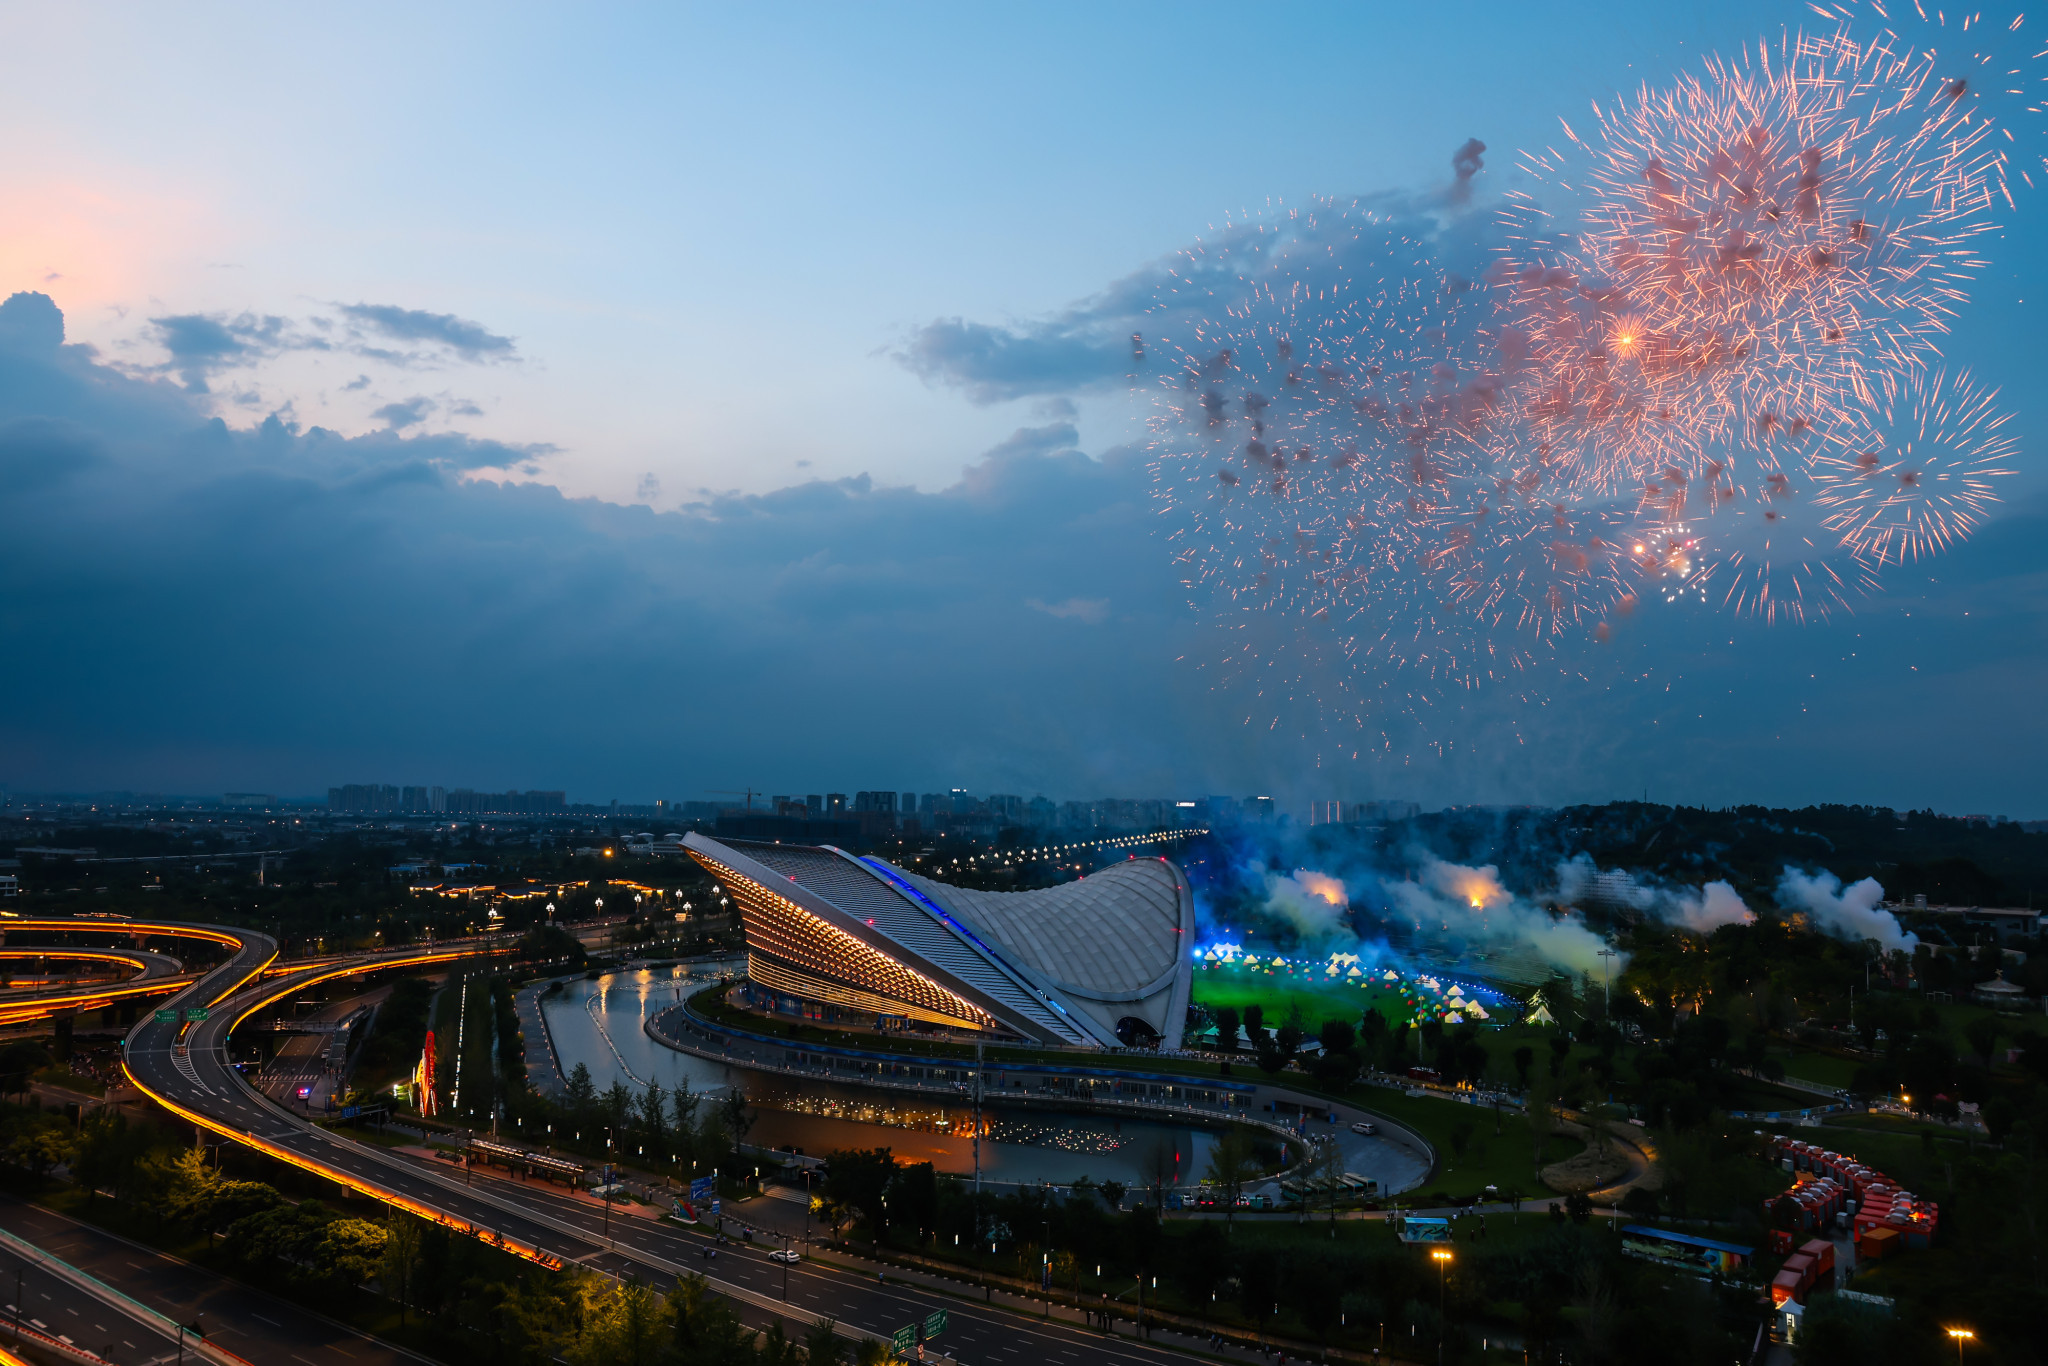 Countdown fireworks are held prior to the start of the Chengdu 2021 Closing Ceremony ©FISU